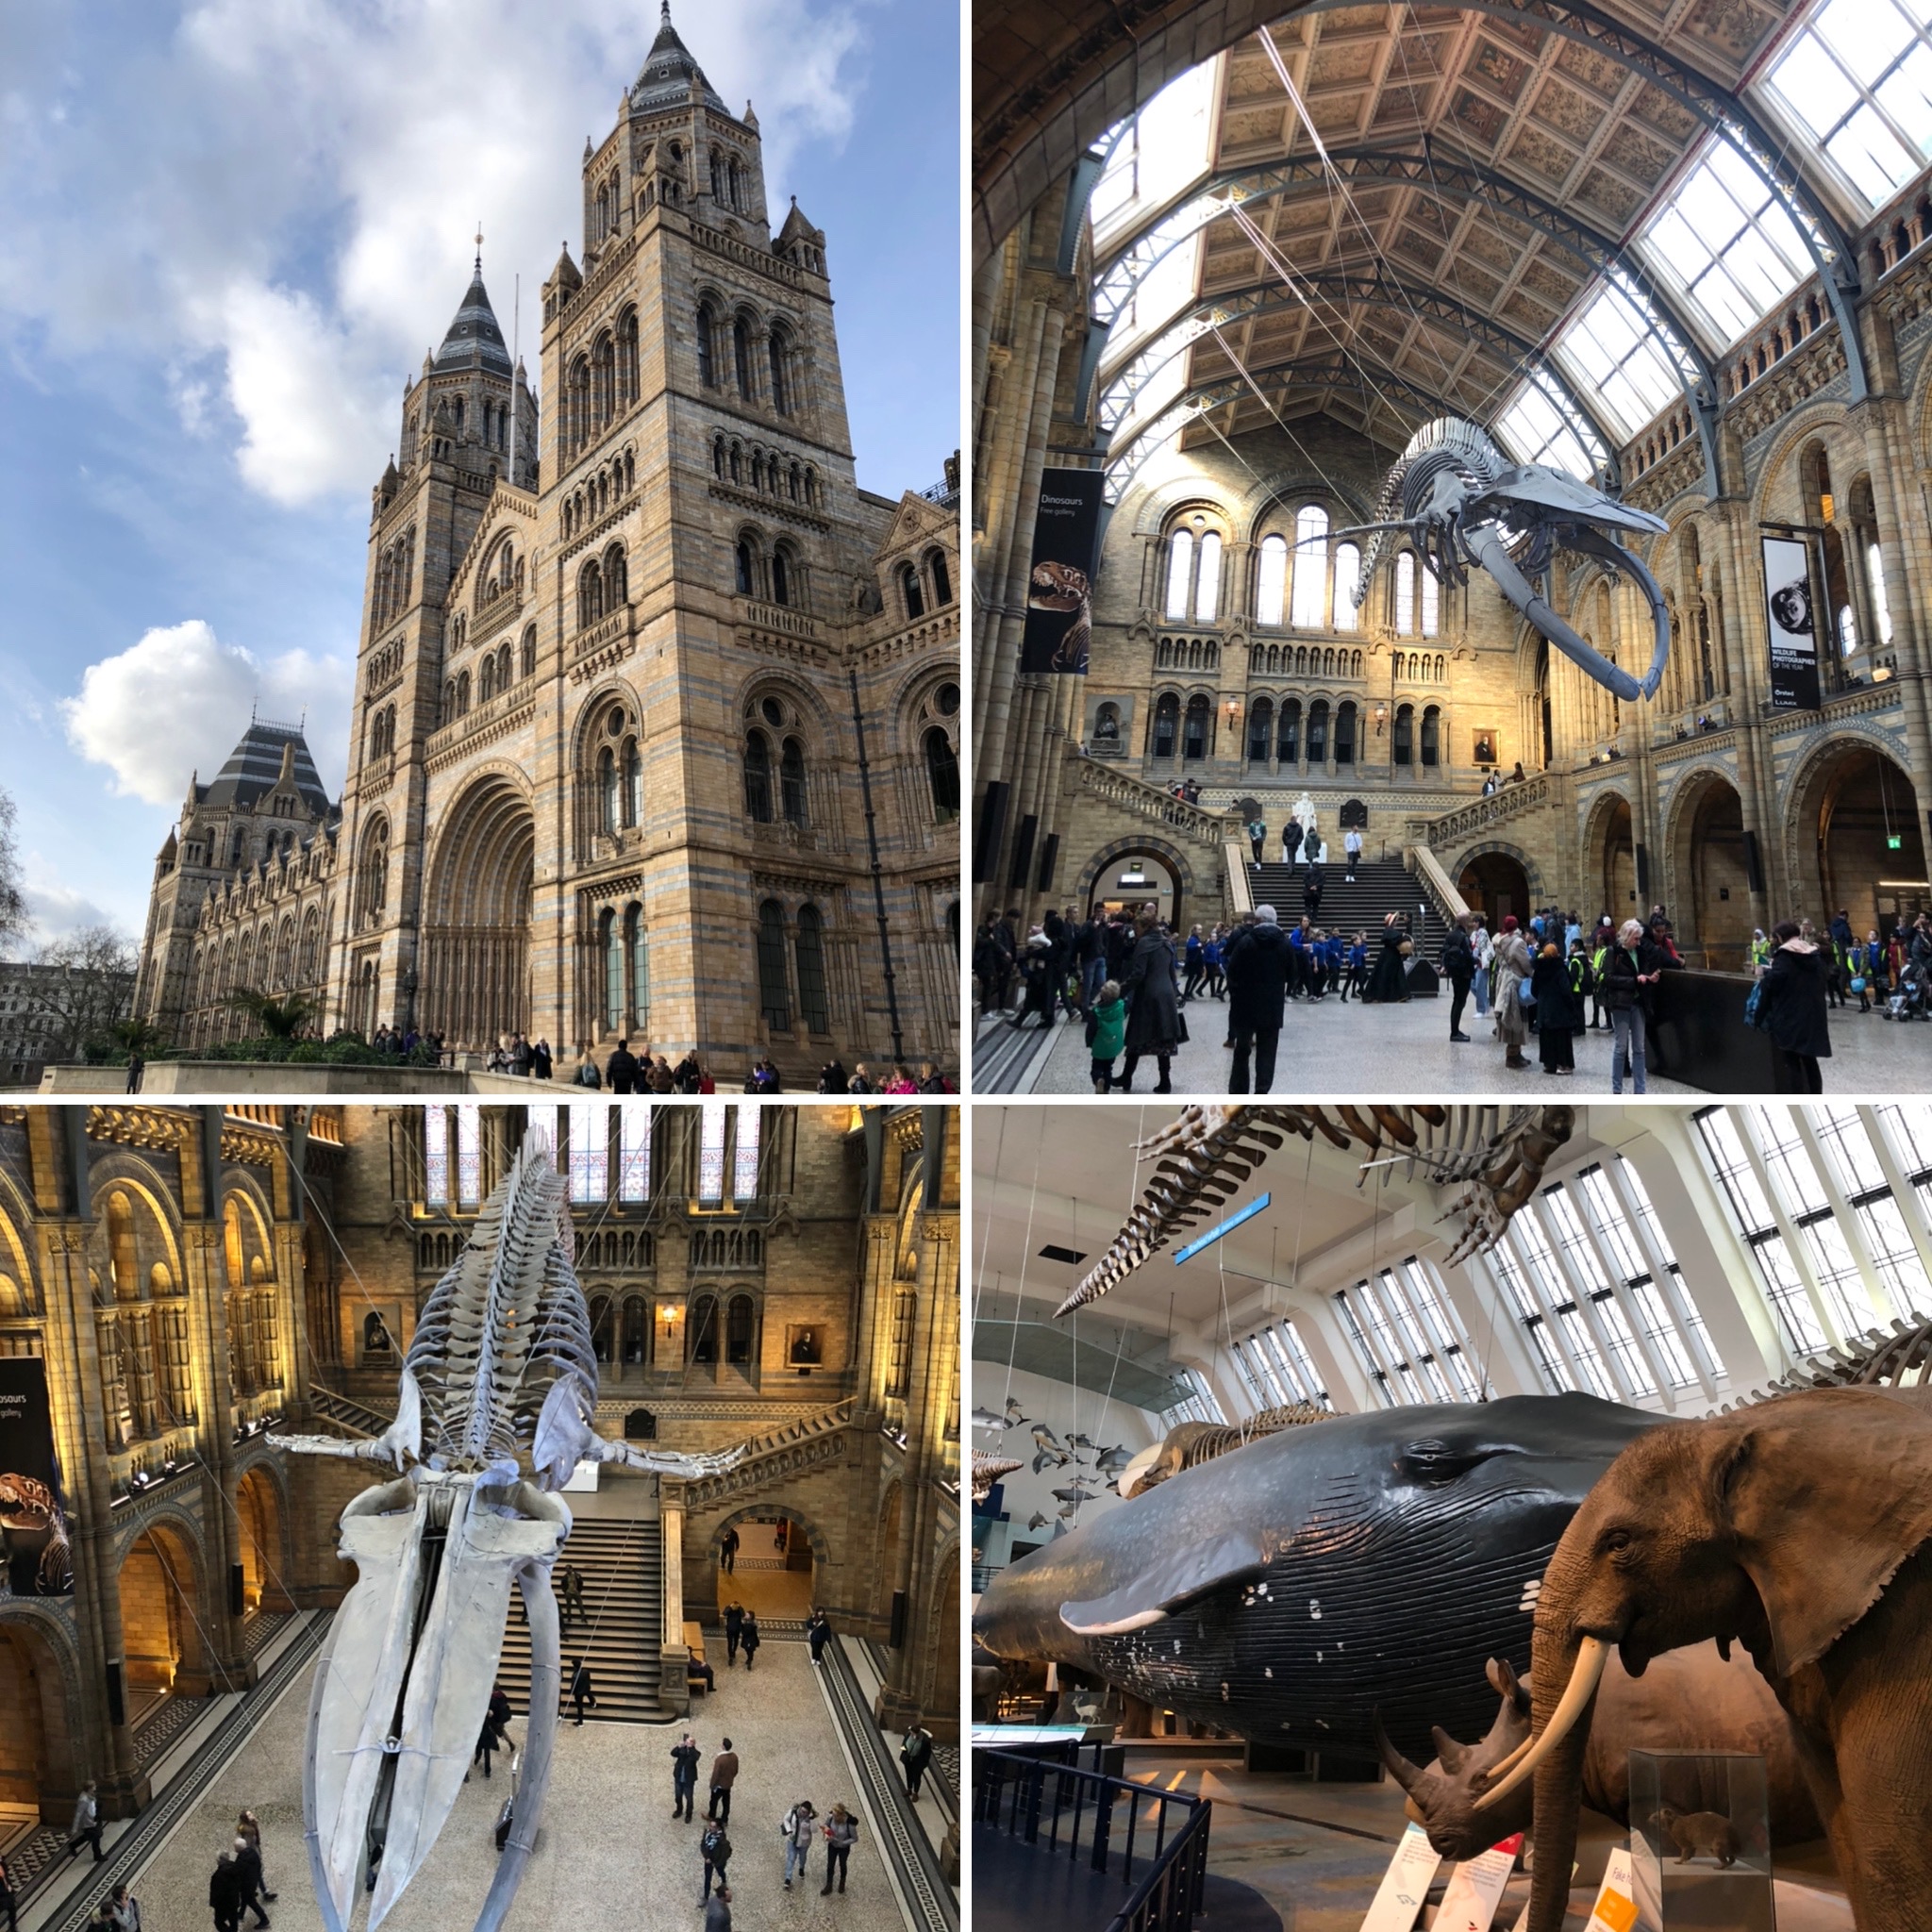 Views Of The Natural History Museum, Home of the Wildlife Photography Exhibition And Bringing Back Memories Of Taking The Kids Back In The 90s